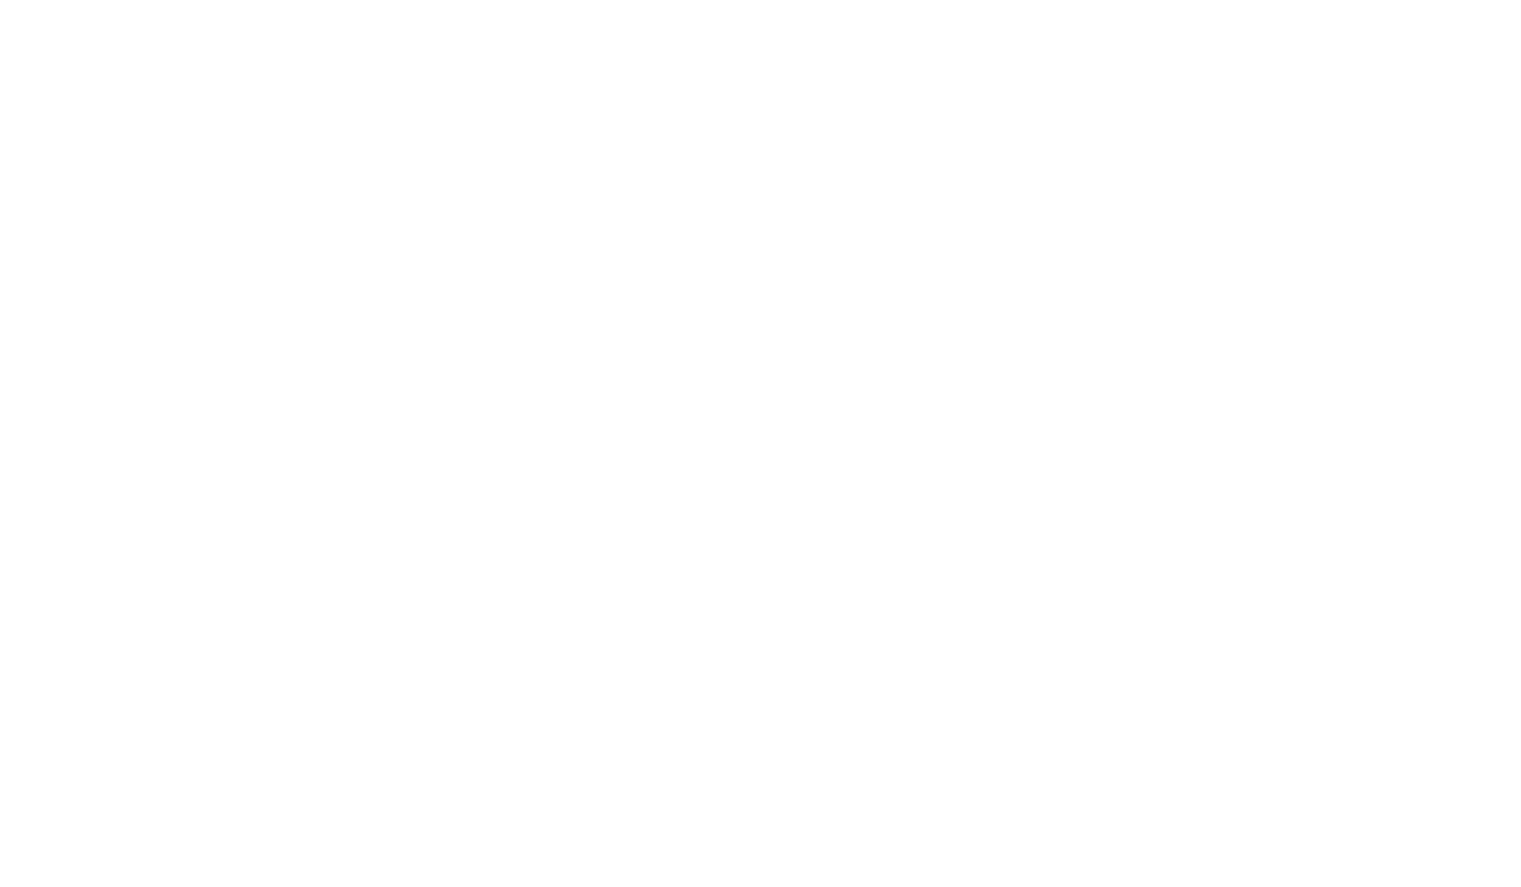 Michigan State University - The School of Hospitality Business - Broad College of Business